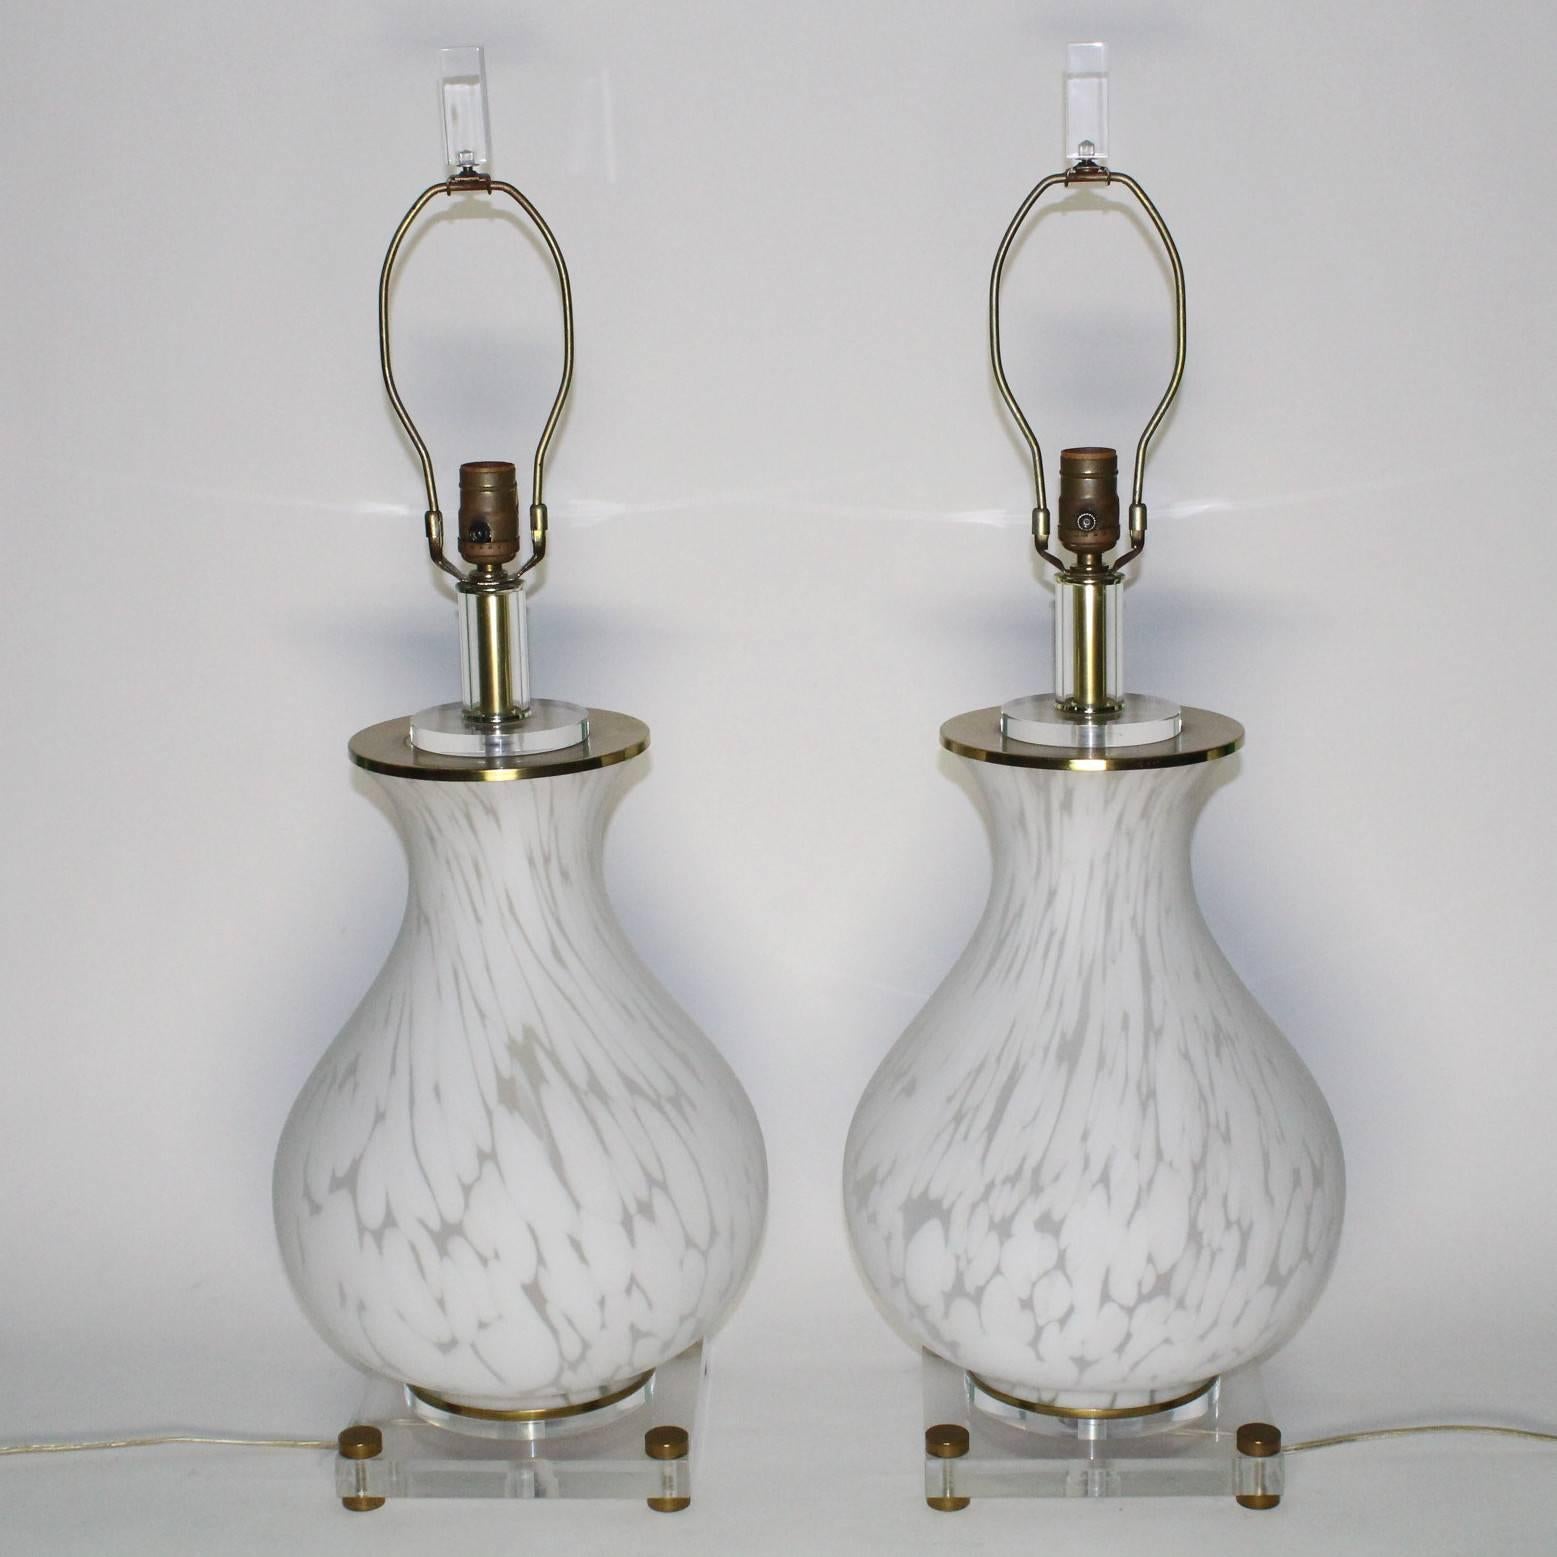 A pair of Italian table lamps by Mazzega, manufactured circa 1960s, each baluster form in mottled white Murano glass, mounted on Lucite bases with brass feet; Lucite finials included. Excellent original vintage condition.

10745